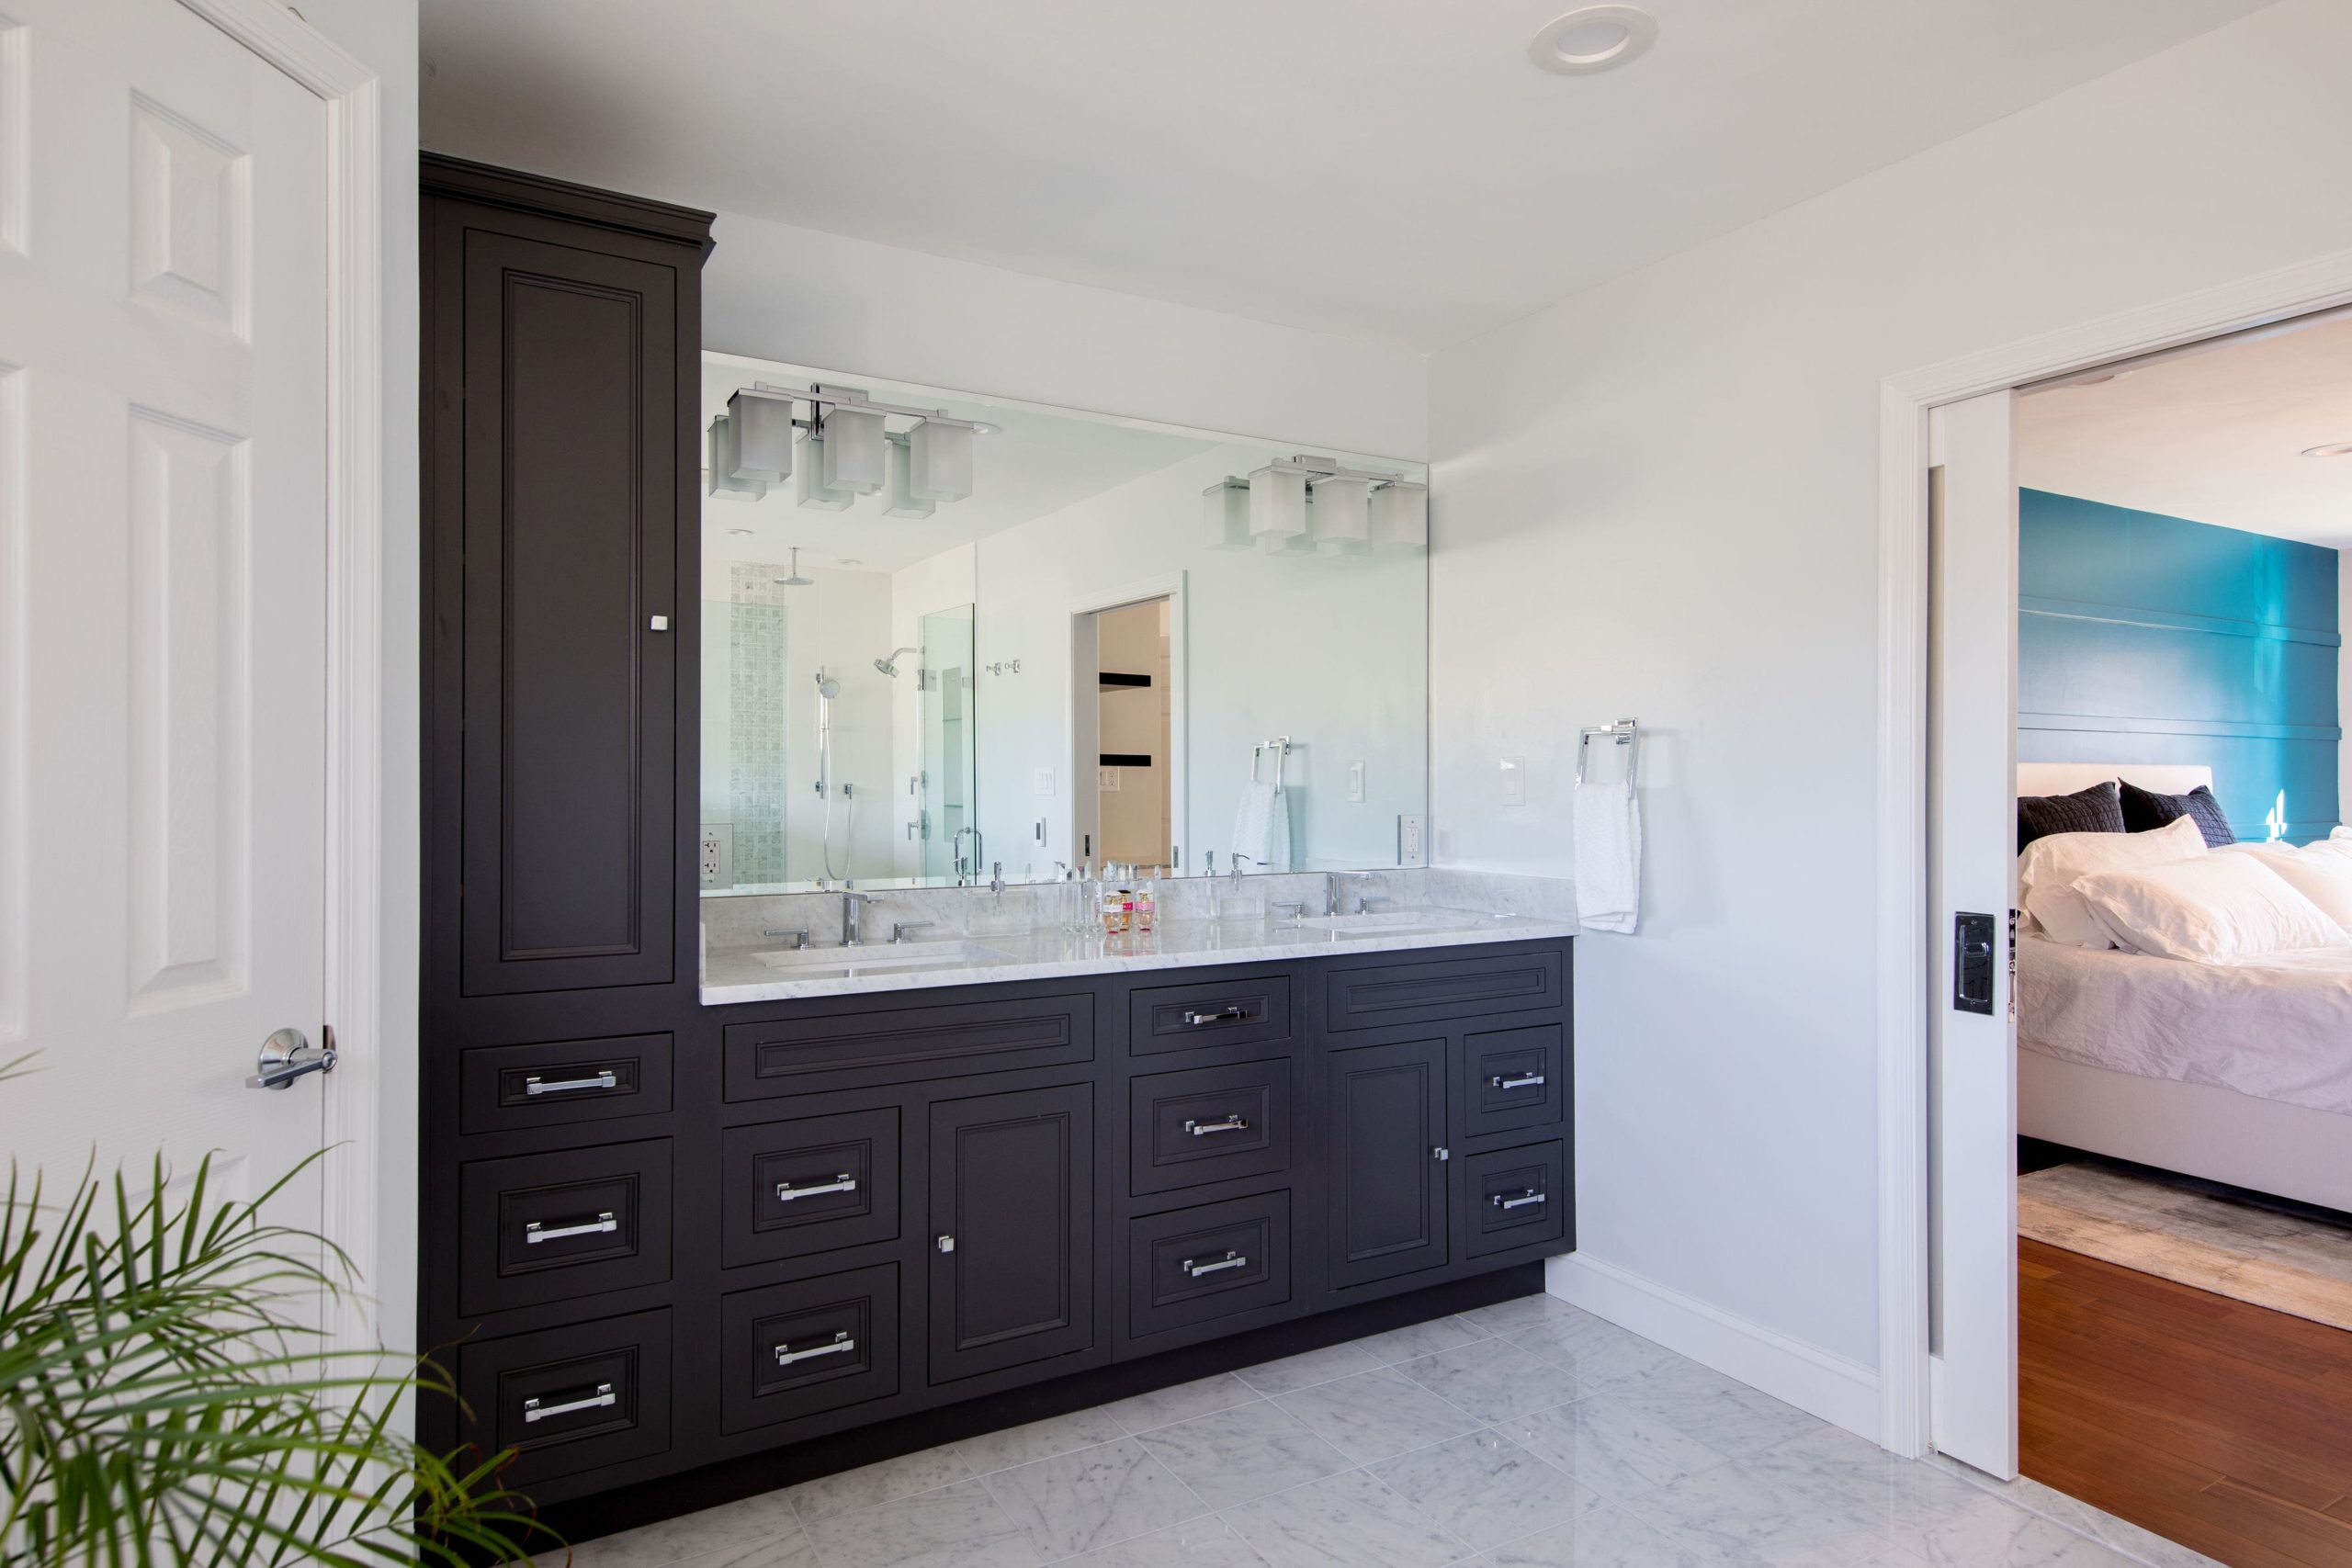 a bathroom with a large mirror, double sinks, and many wooden cabinets